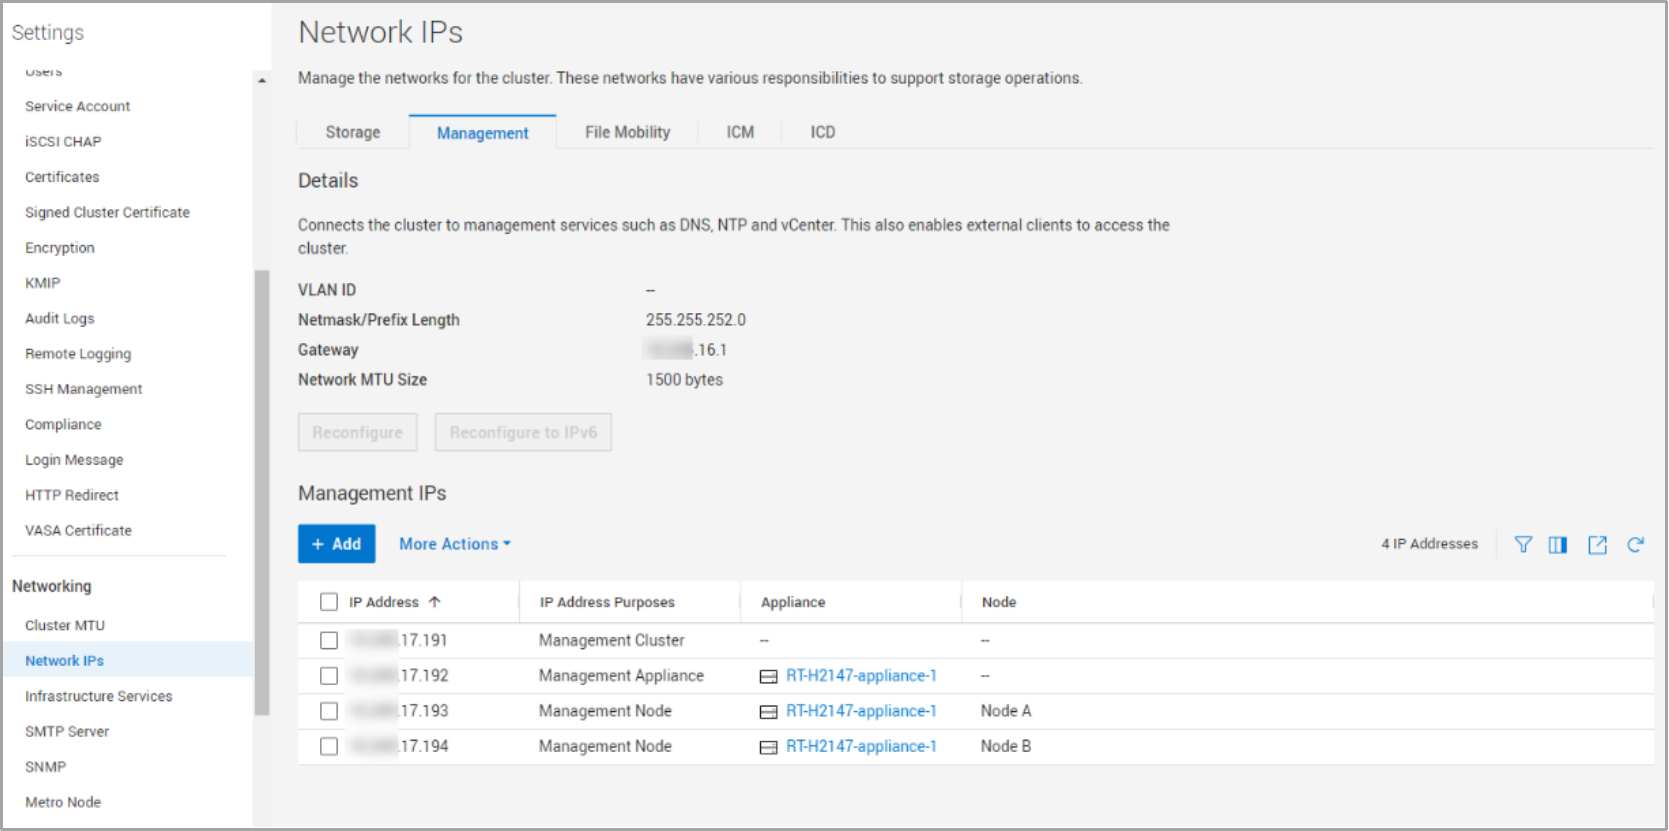 This figure shows the Network IPs page of PowerStore Manager located in settings > network IPs. 